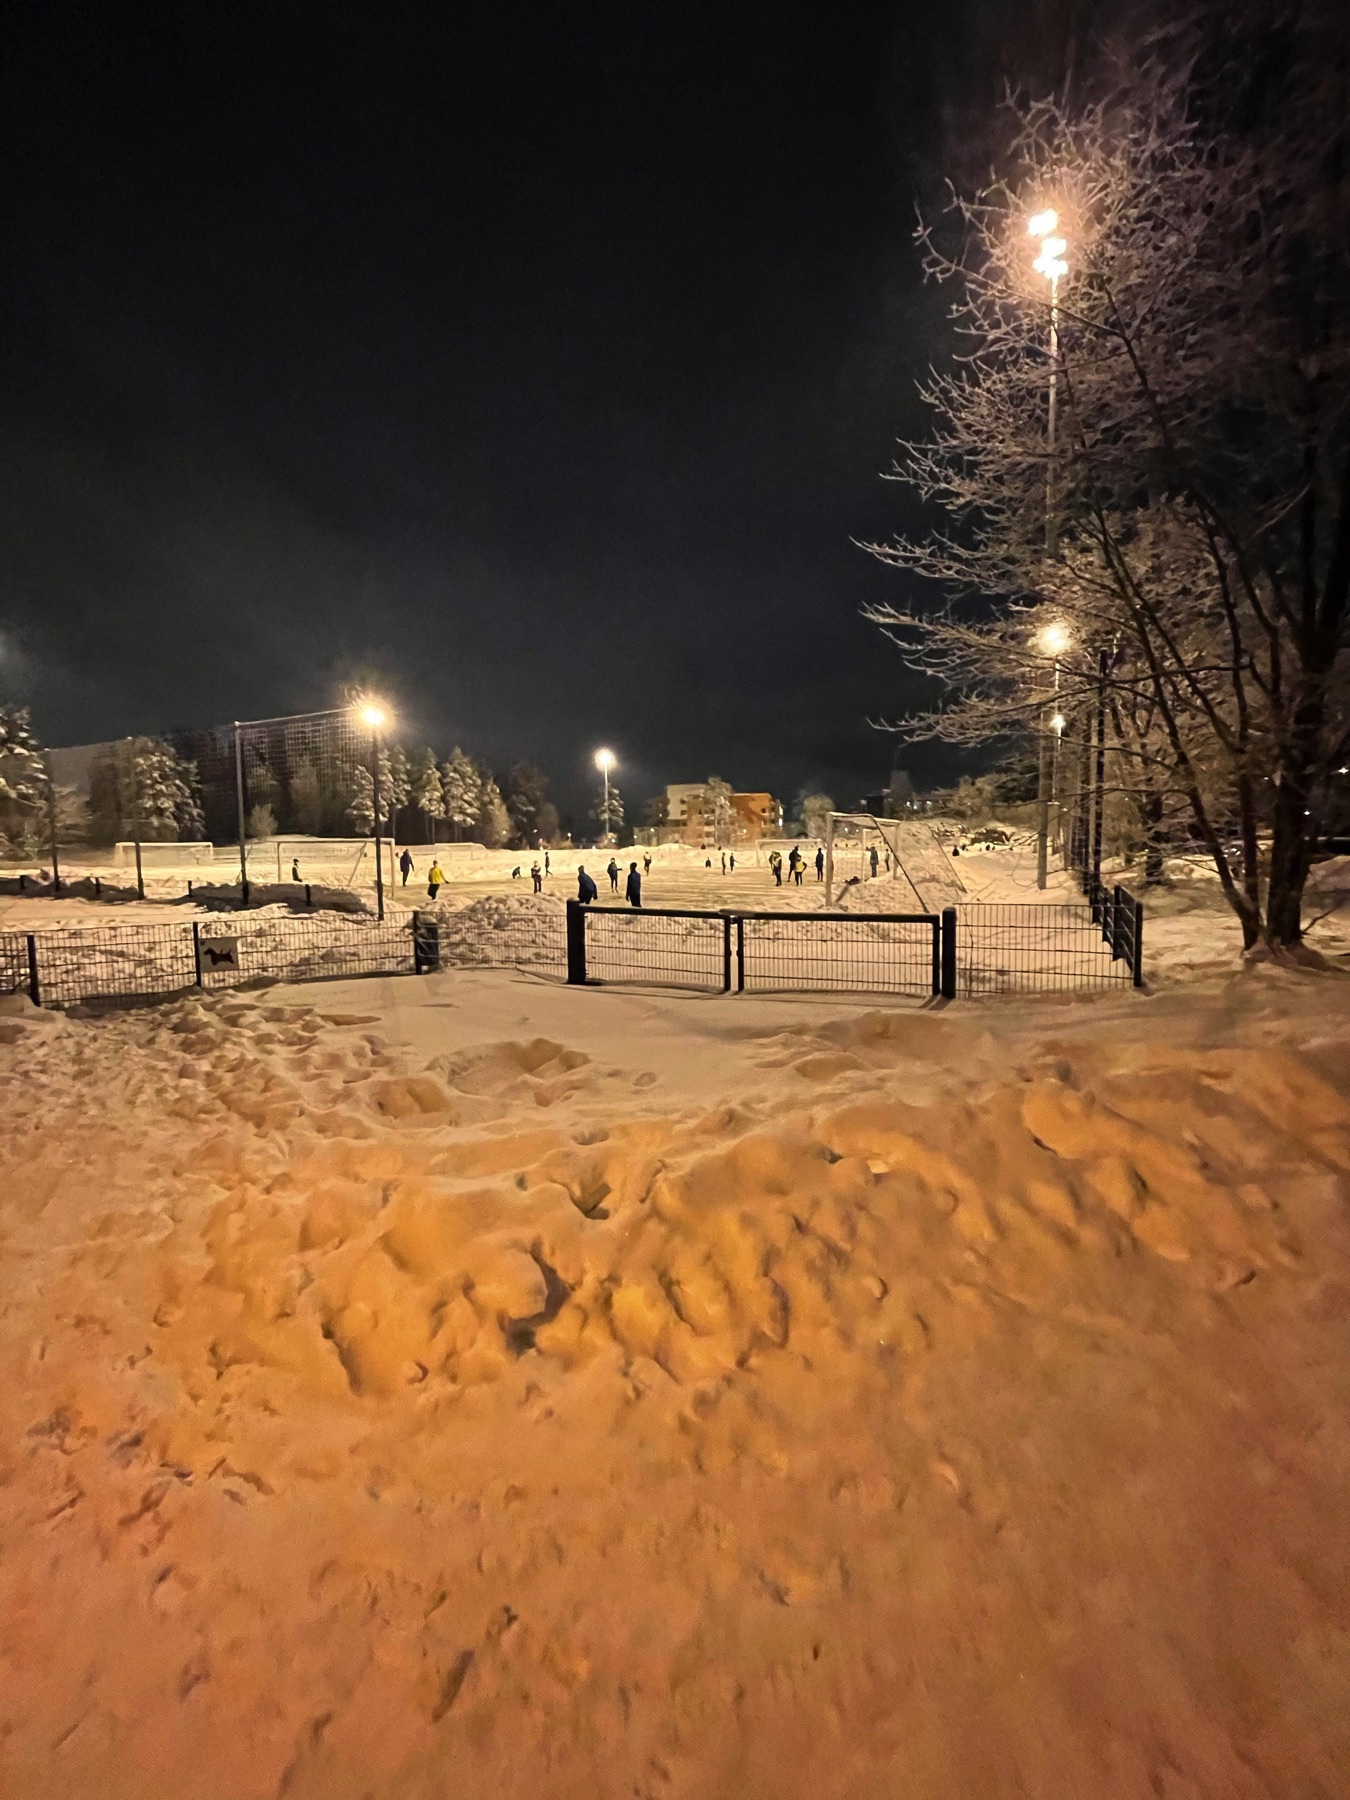 snow, football pitch with a plowed green patch 20+ kids playing soccer